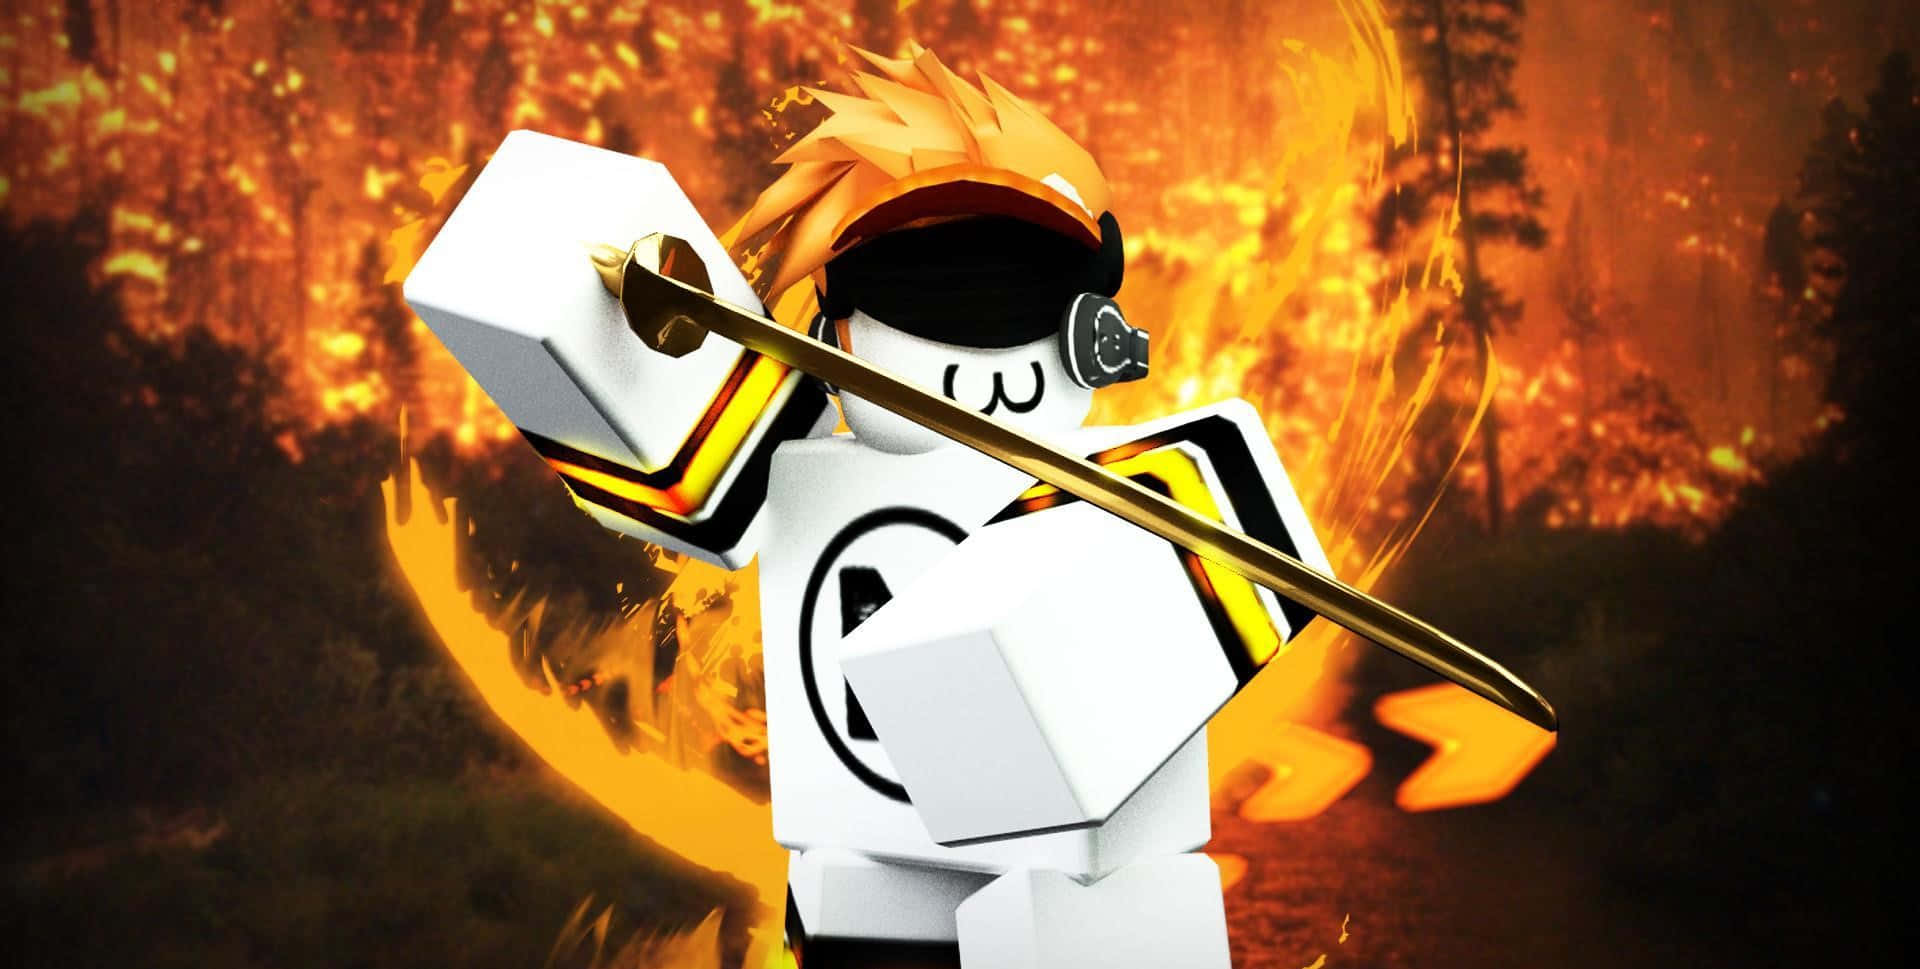 Lego Firefighter Heroic Pose Background